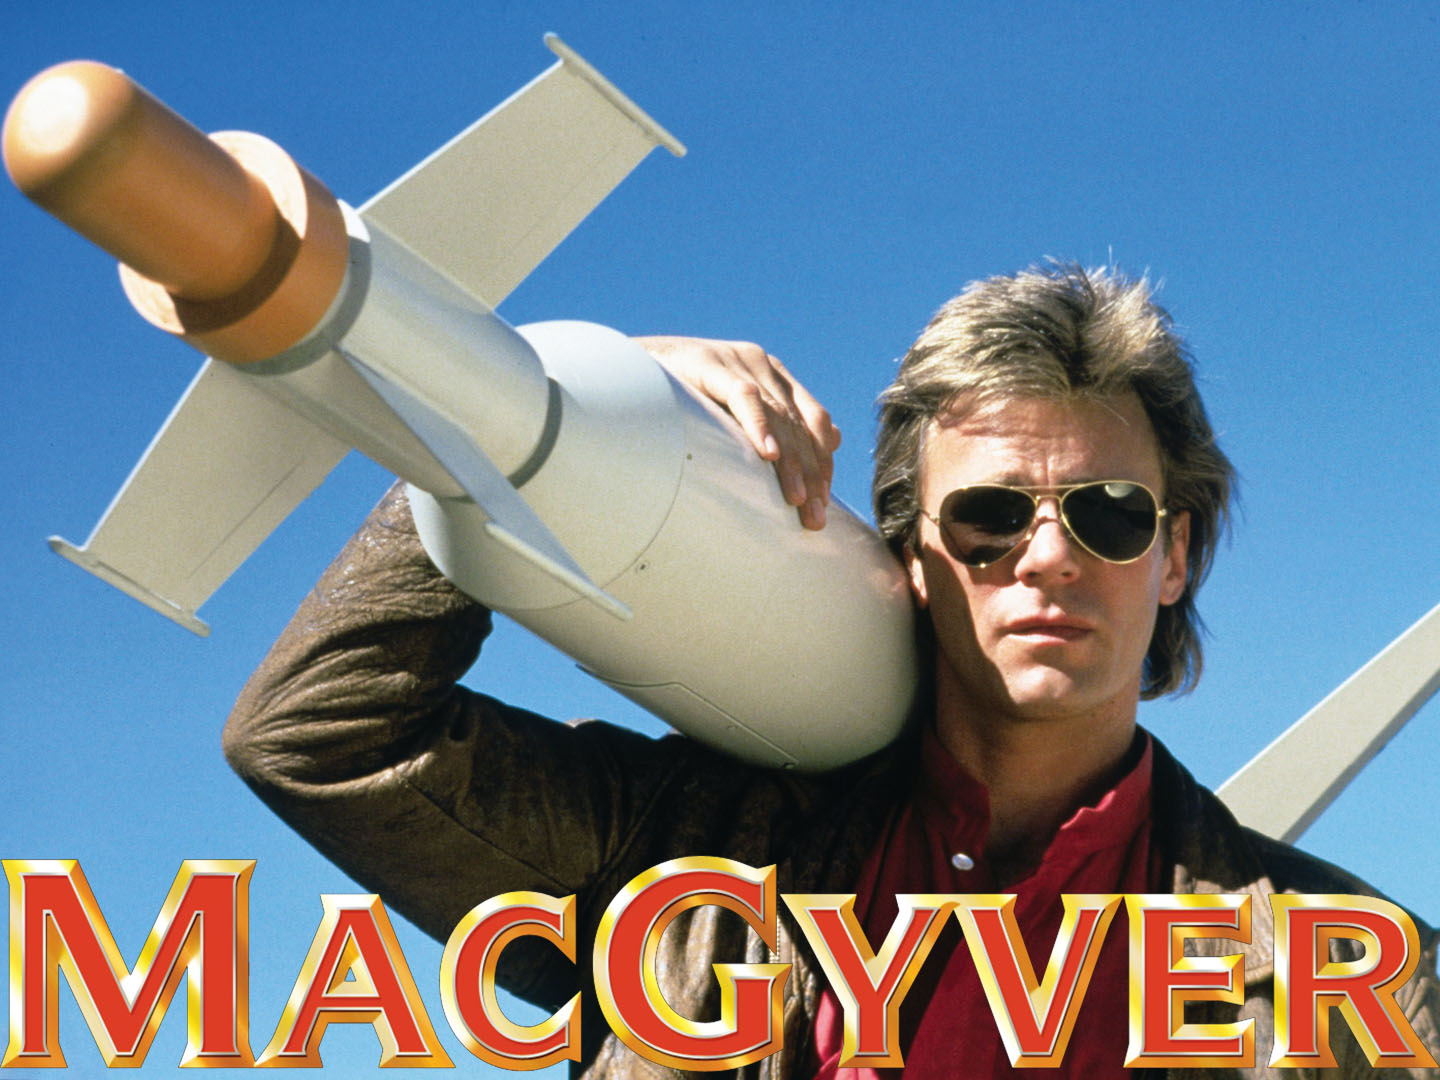 How To Be A Macgyver Advisor Galliard Family Business